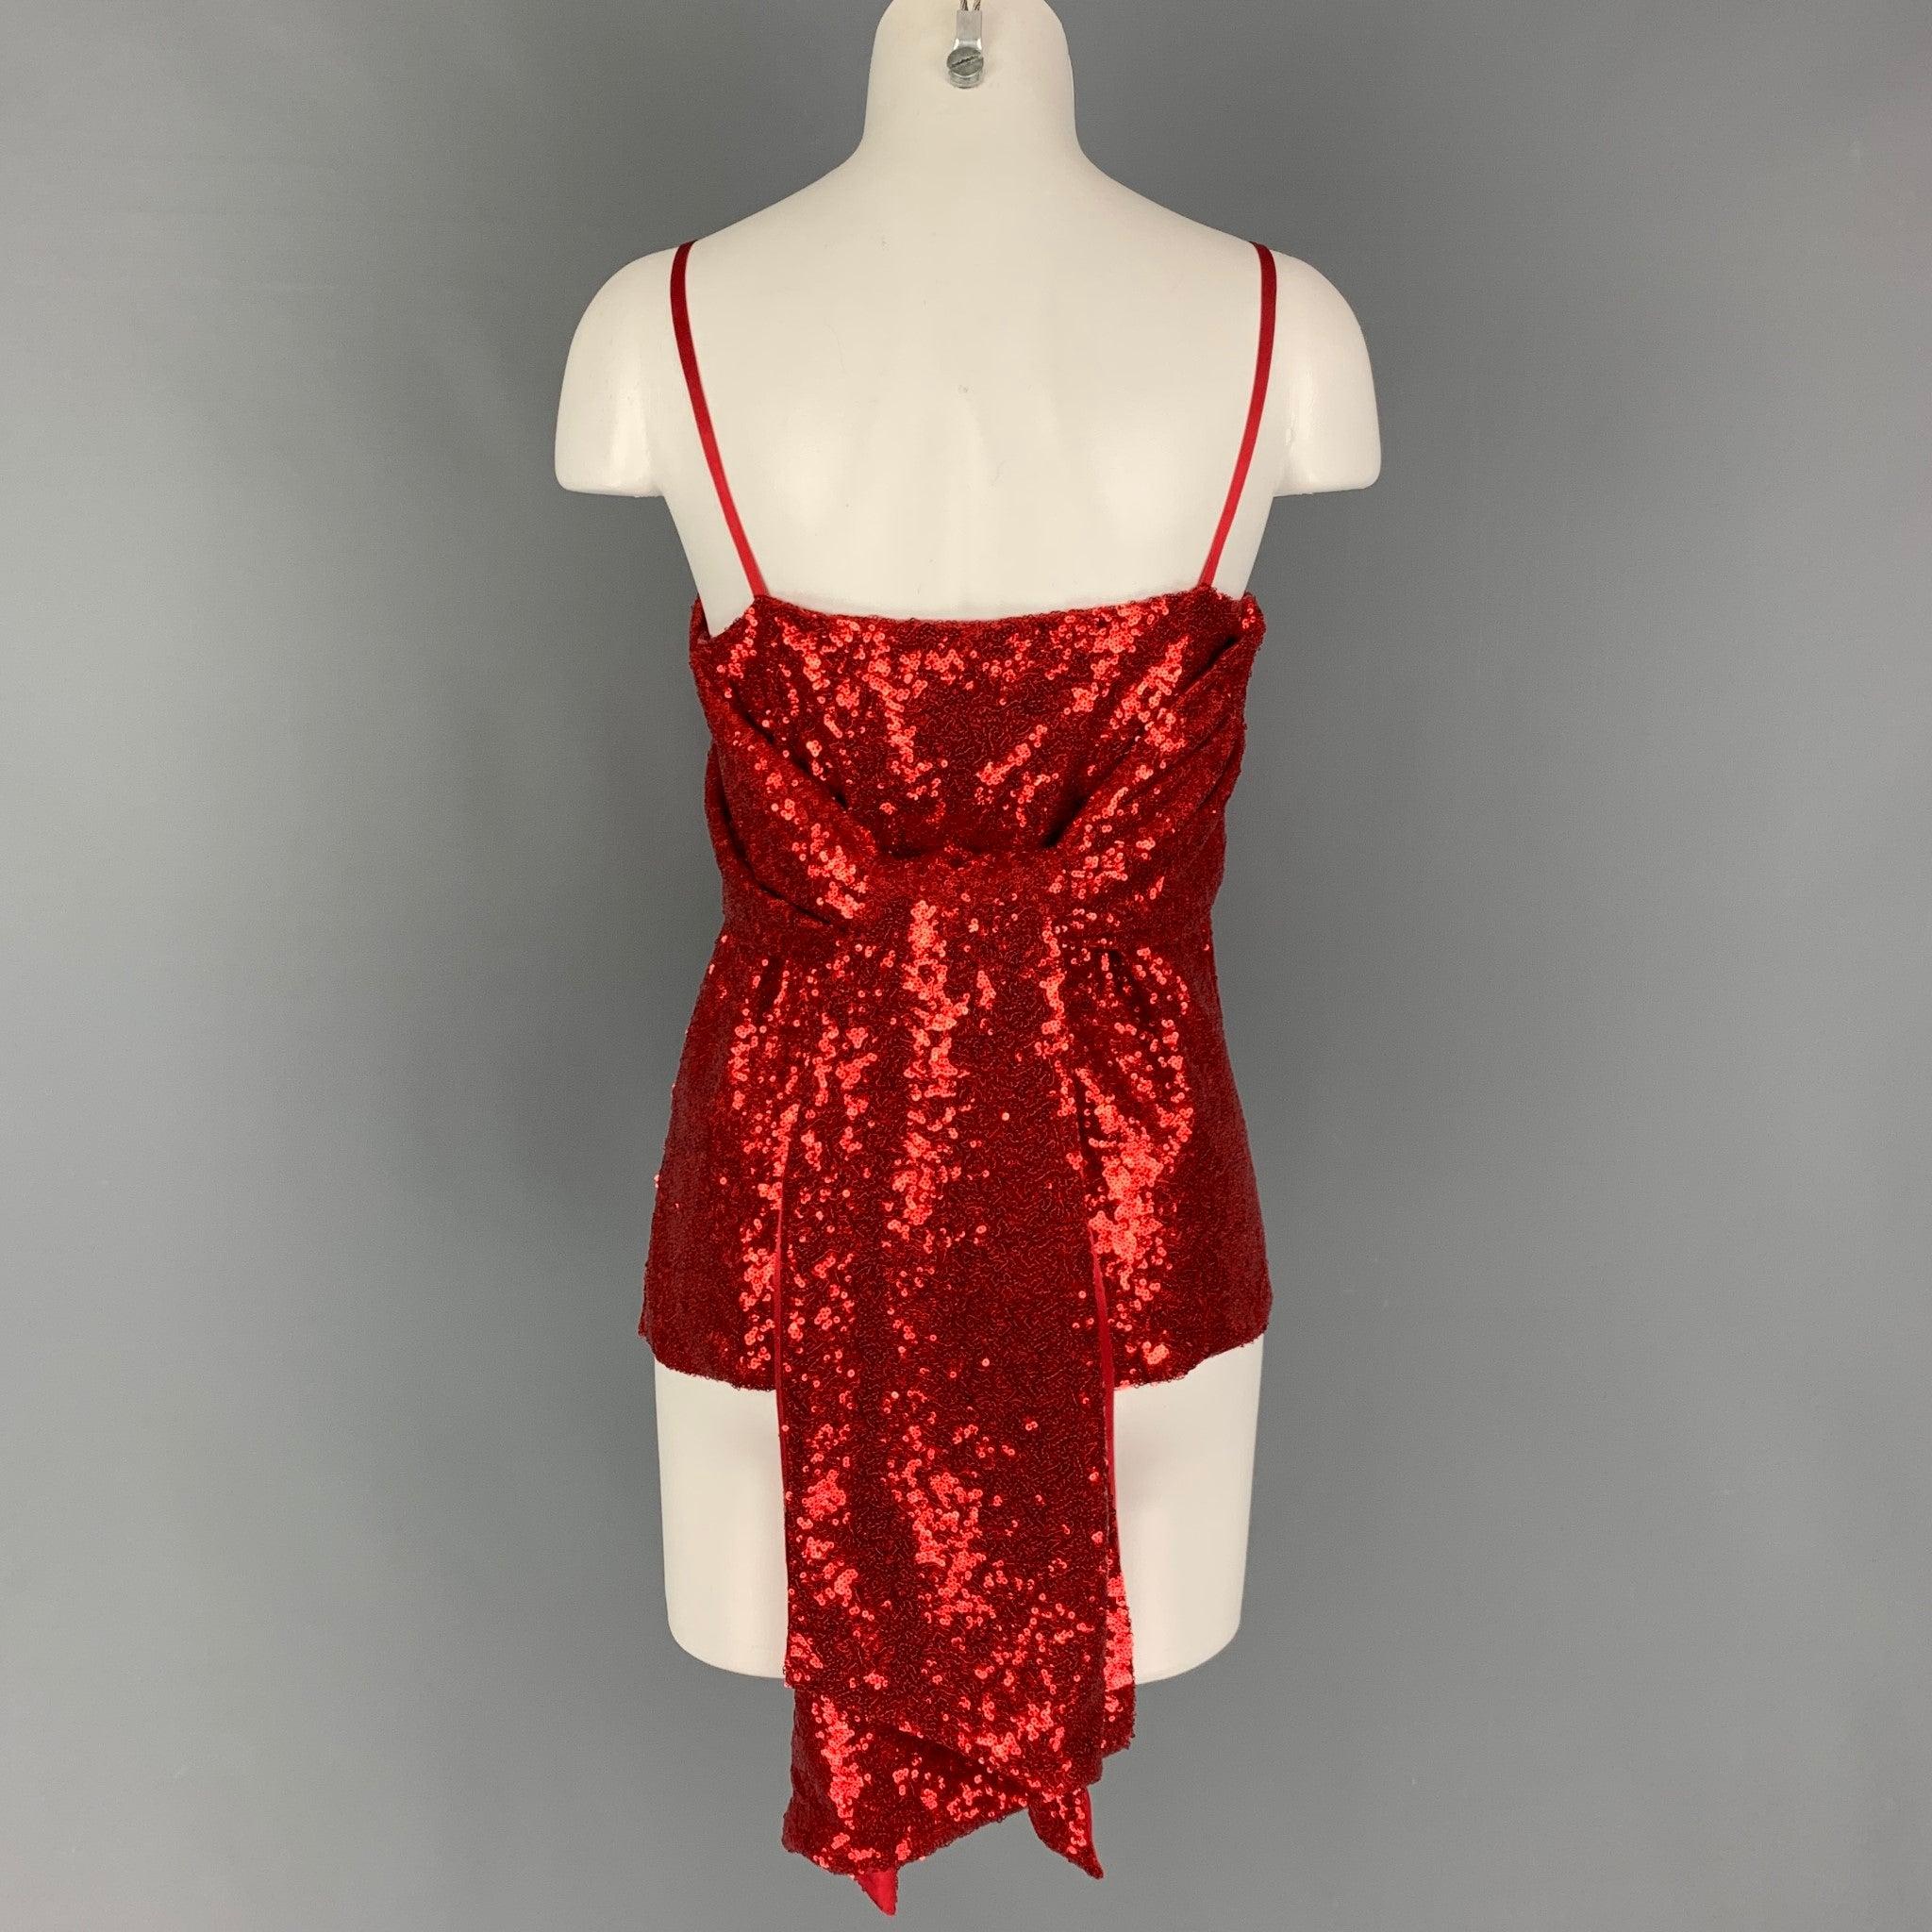 PRABAL GURUNG dress top comes in a red sequined polyester featuring a long draped strap design, side slits, and spaghetti straps. Made in USA. New With Tags.
 

Marked:   2 

Measurements: 
  Bust: 34 inches  Length: 15 inches 
  
  
 
Reference: